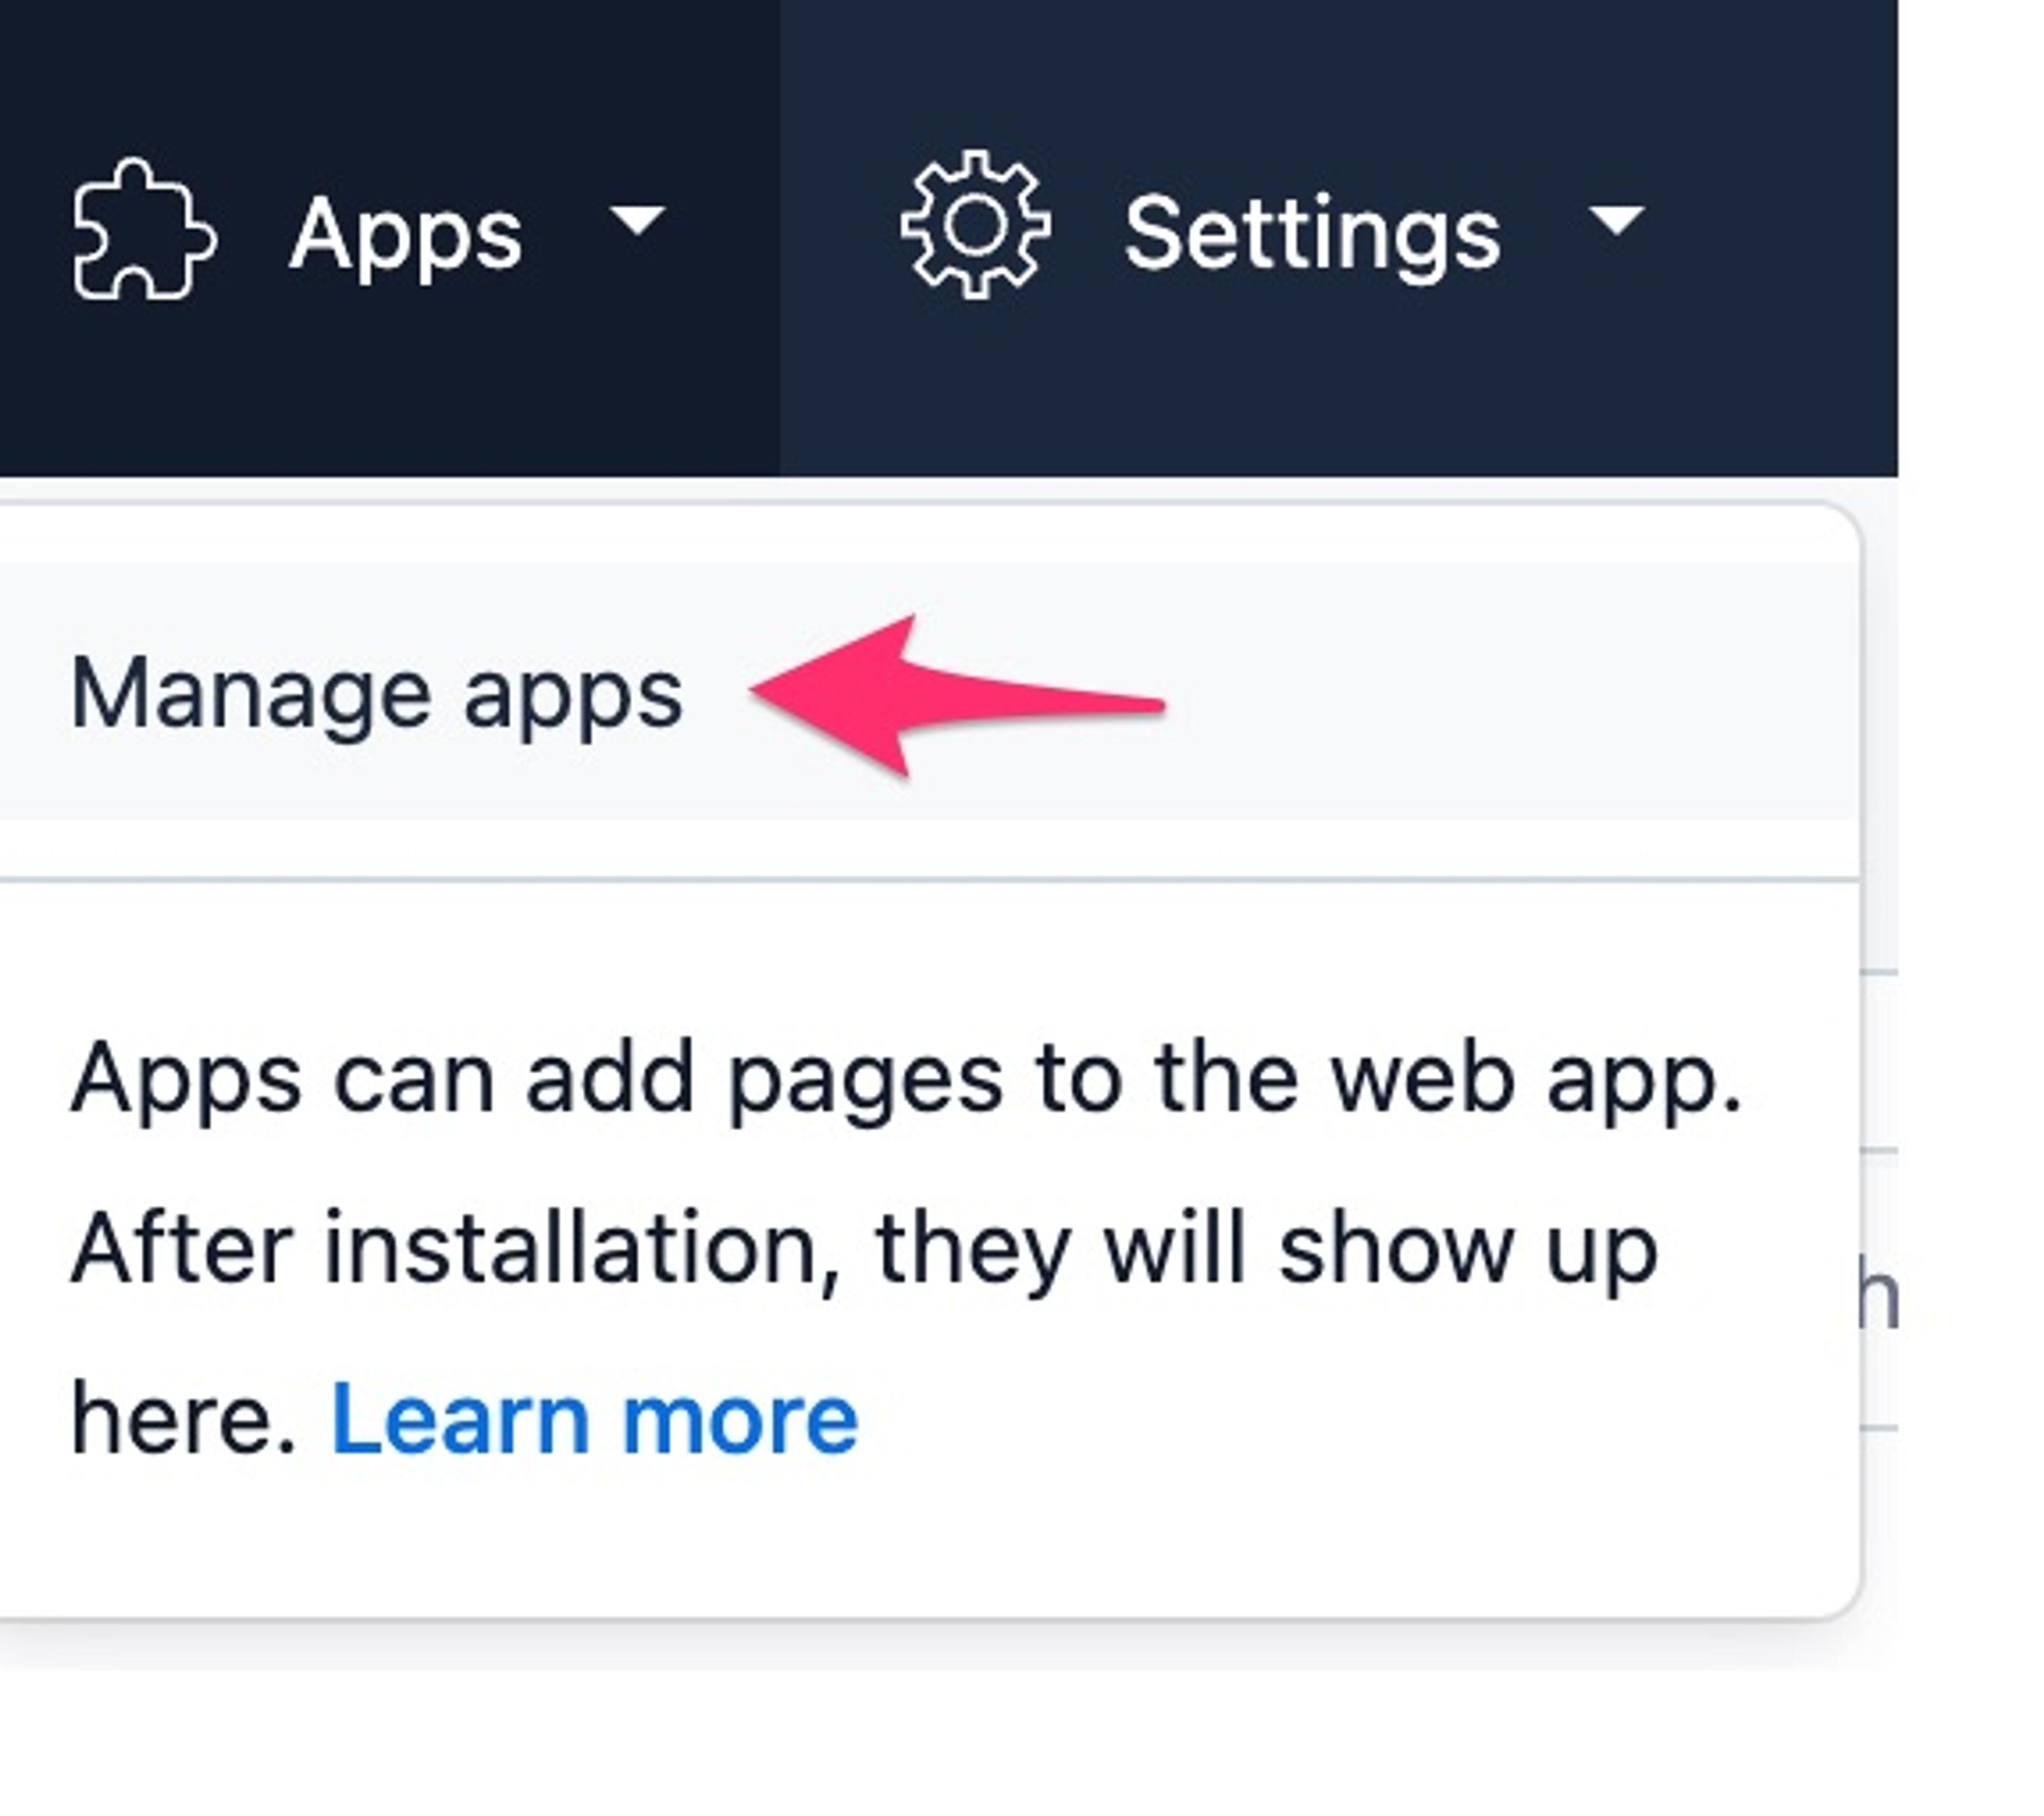 Click "Apps" in the top navigation bar and then click "Manage apps"